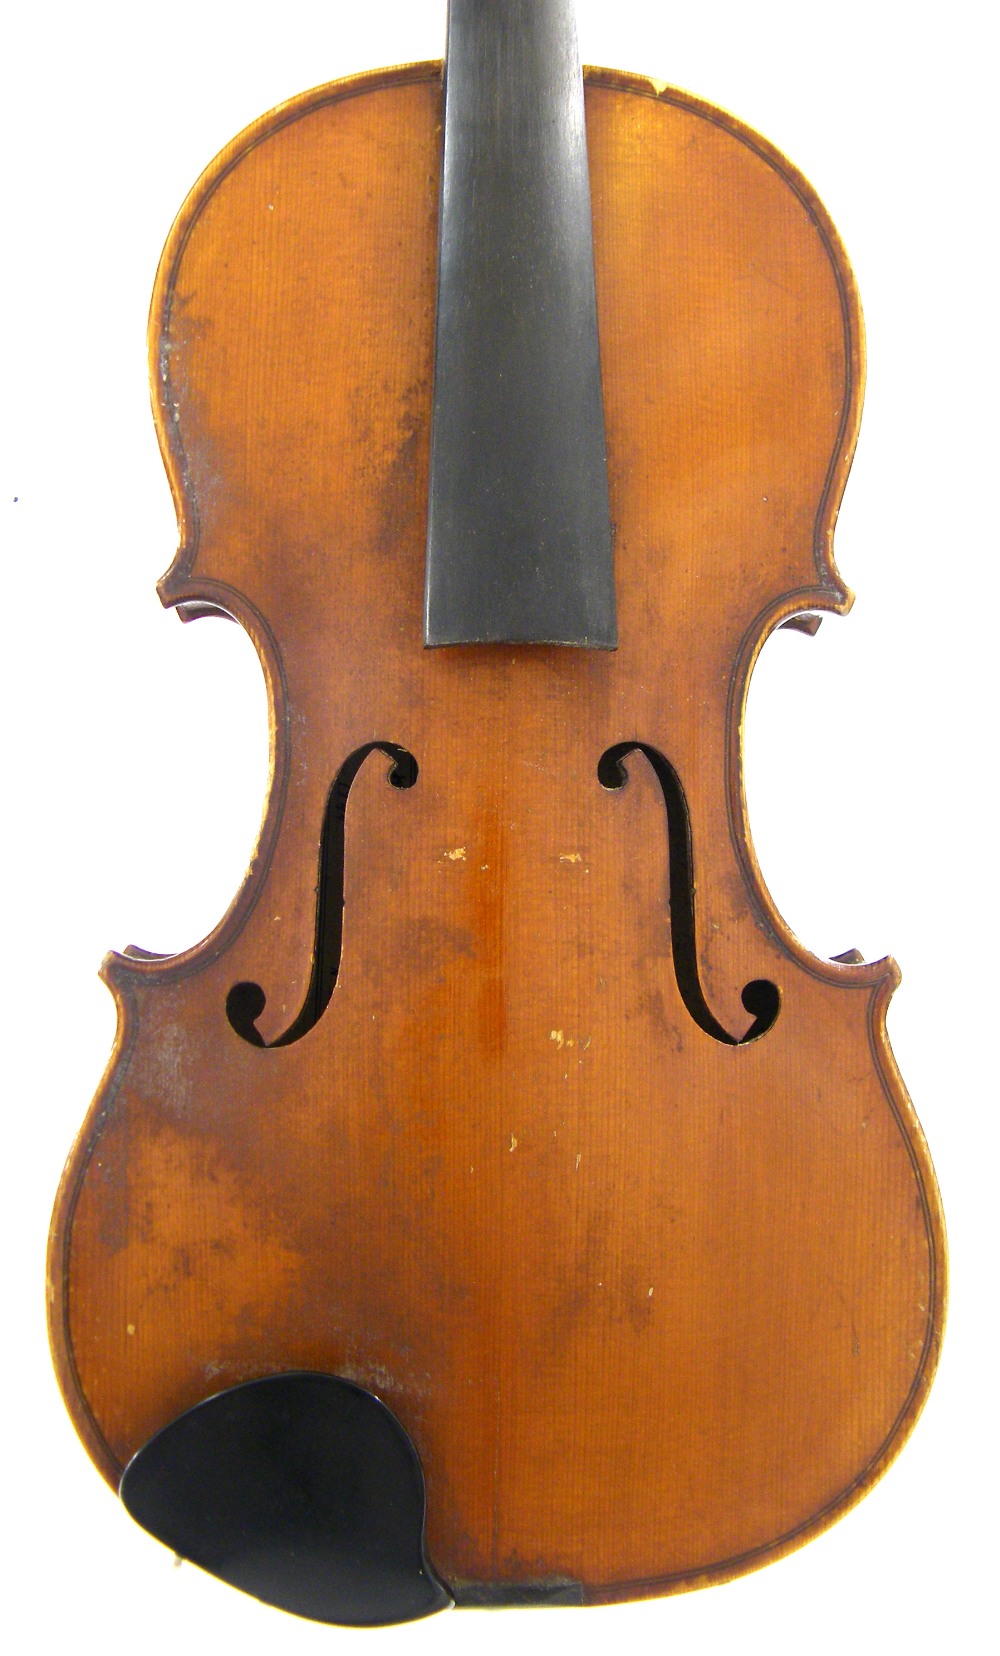 French violin by and labelled Charles Bailly Martre Luthier Expert, Annee 1944 no. 660, also